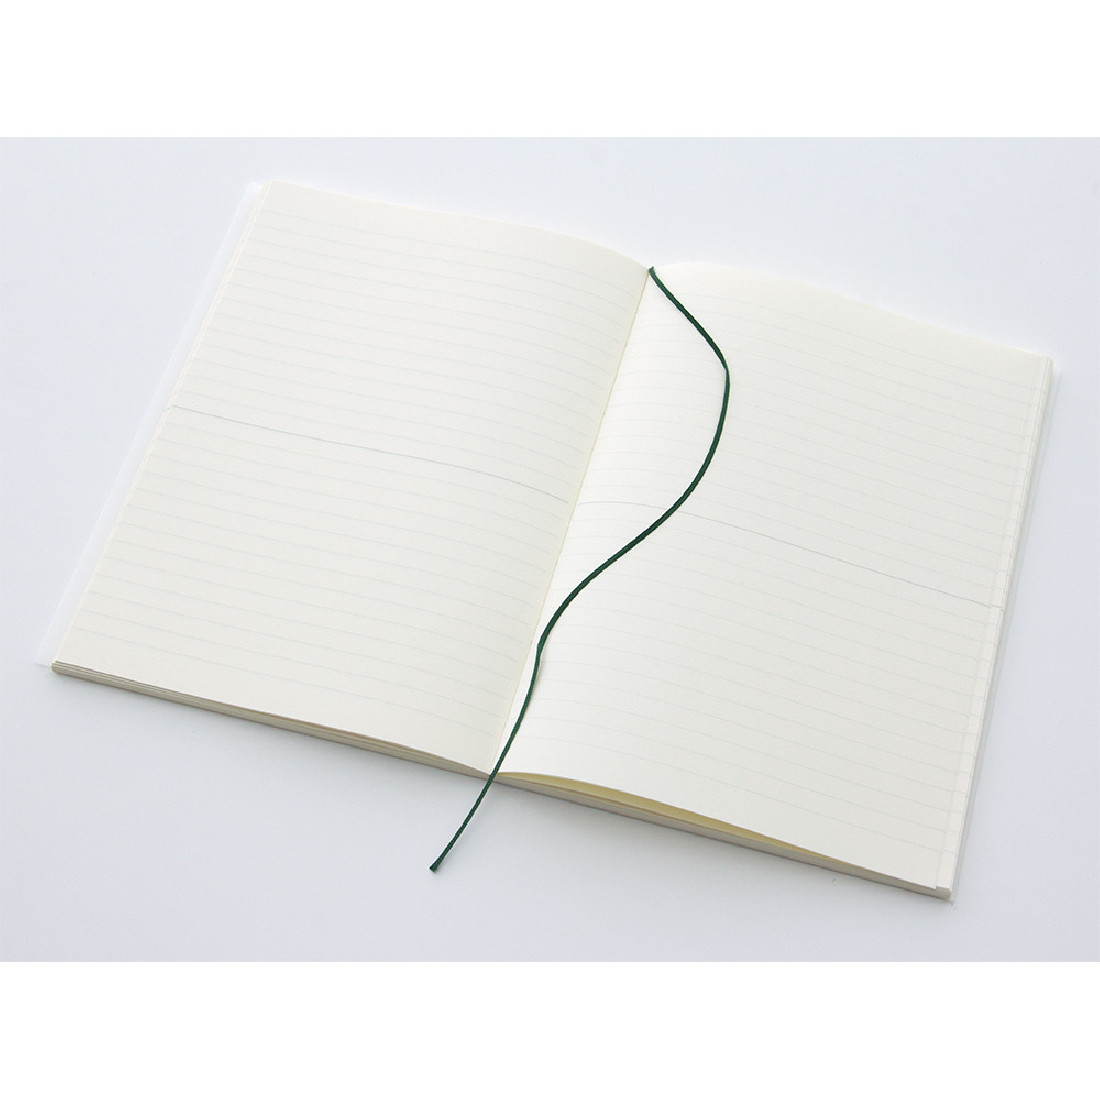 Midori MD Notebook A5148x210 mm, 176 pages, glassine paper cover, Lined, Bookmark string, Label stickers, Thread-stitched book-binding (15294006)